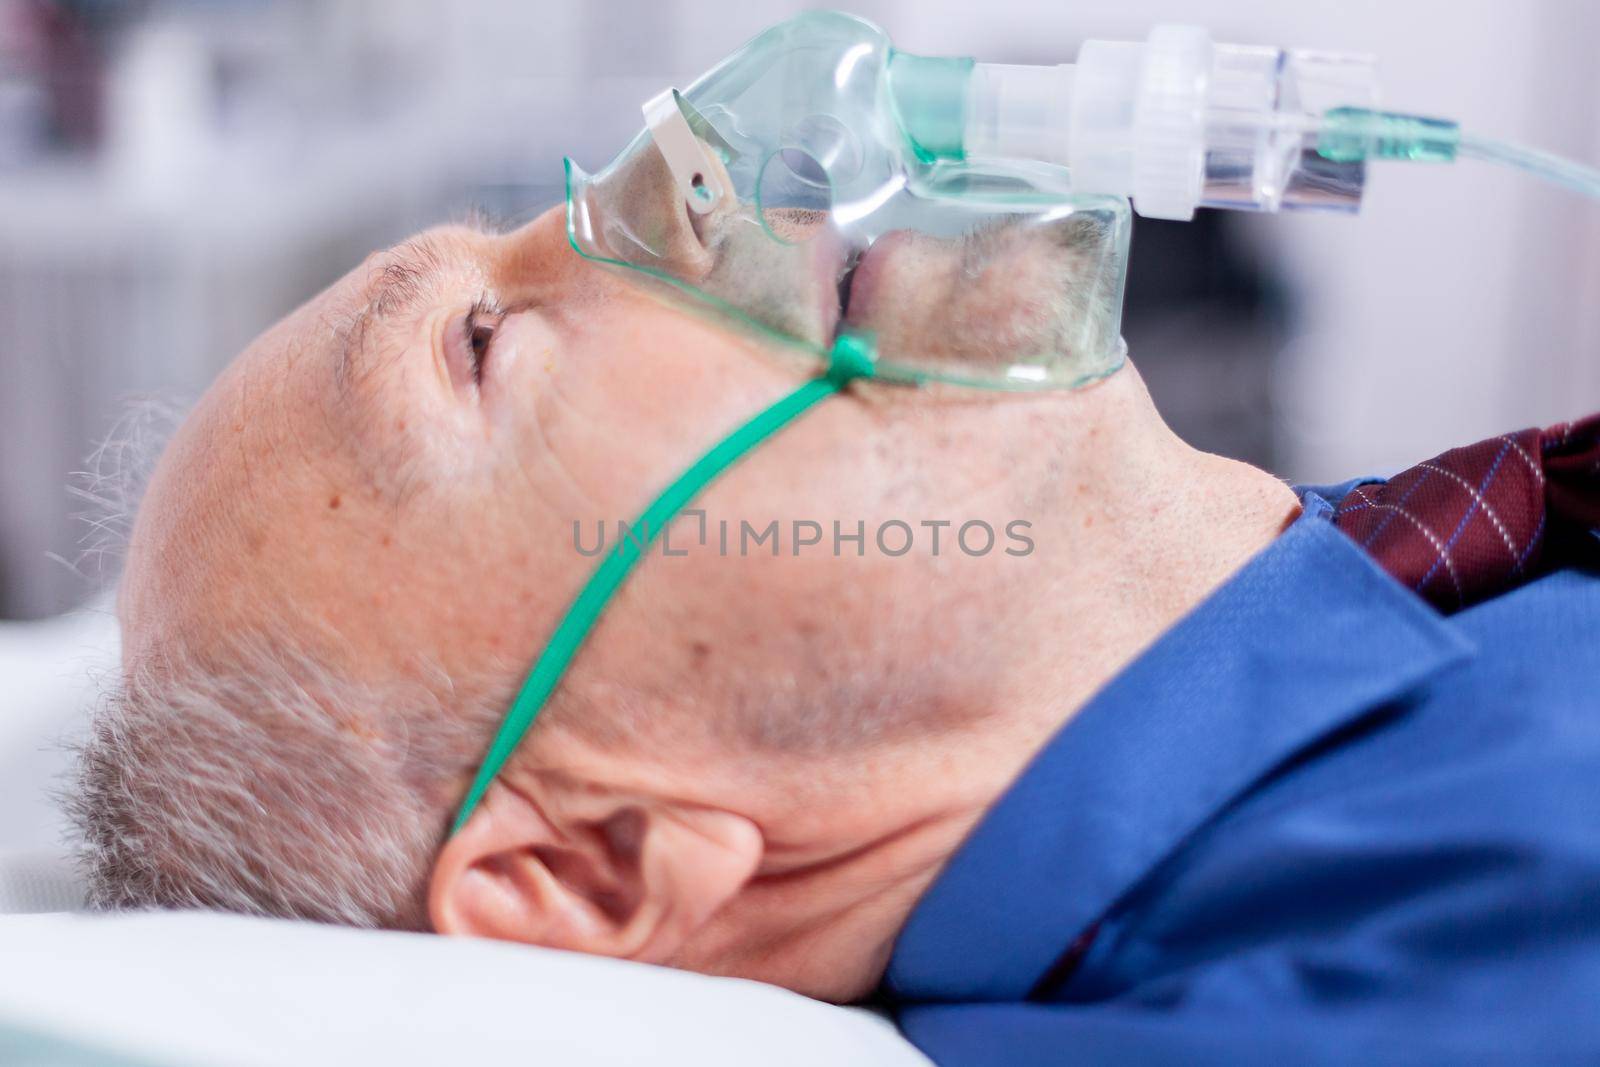 Old man breathing with oxygen mask in hospital bed during coronavirus pandemic. Medicine medical healthcare system epidemic lungs infection treatment